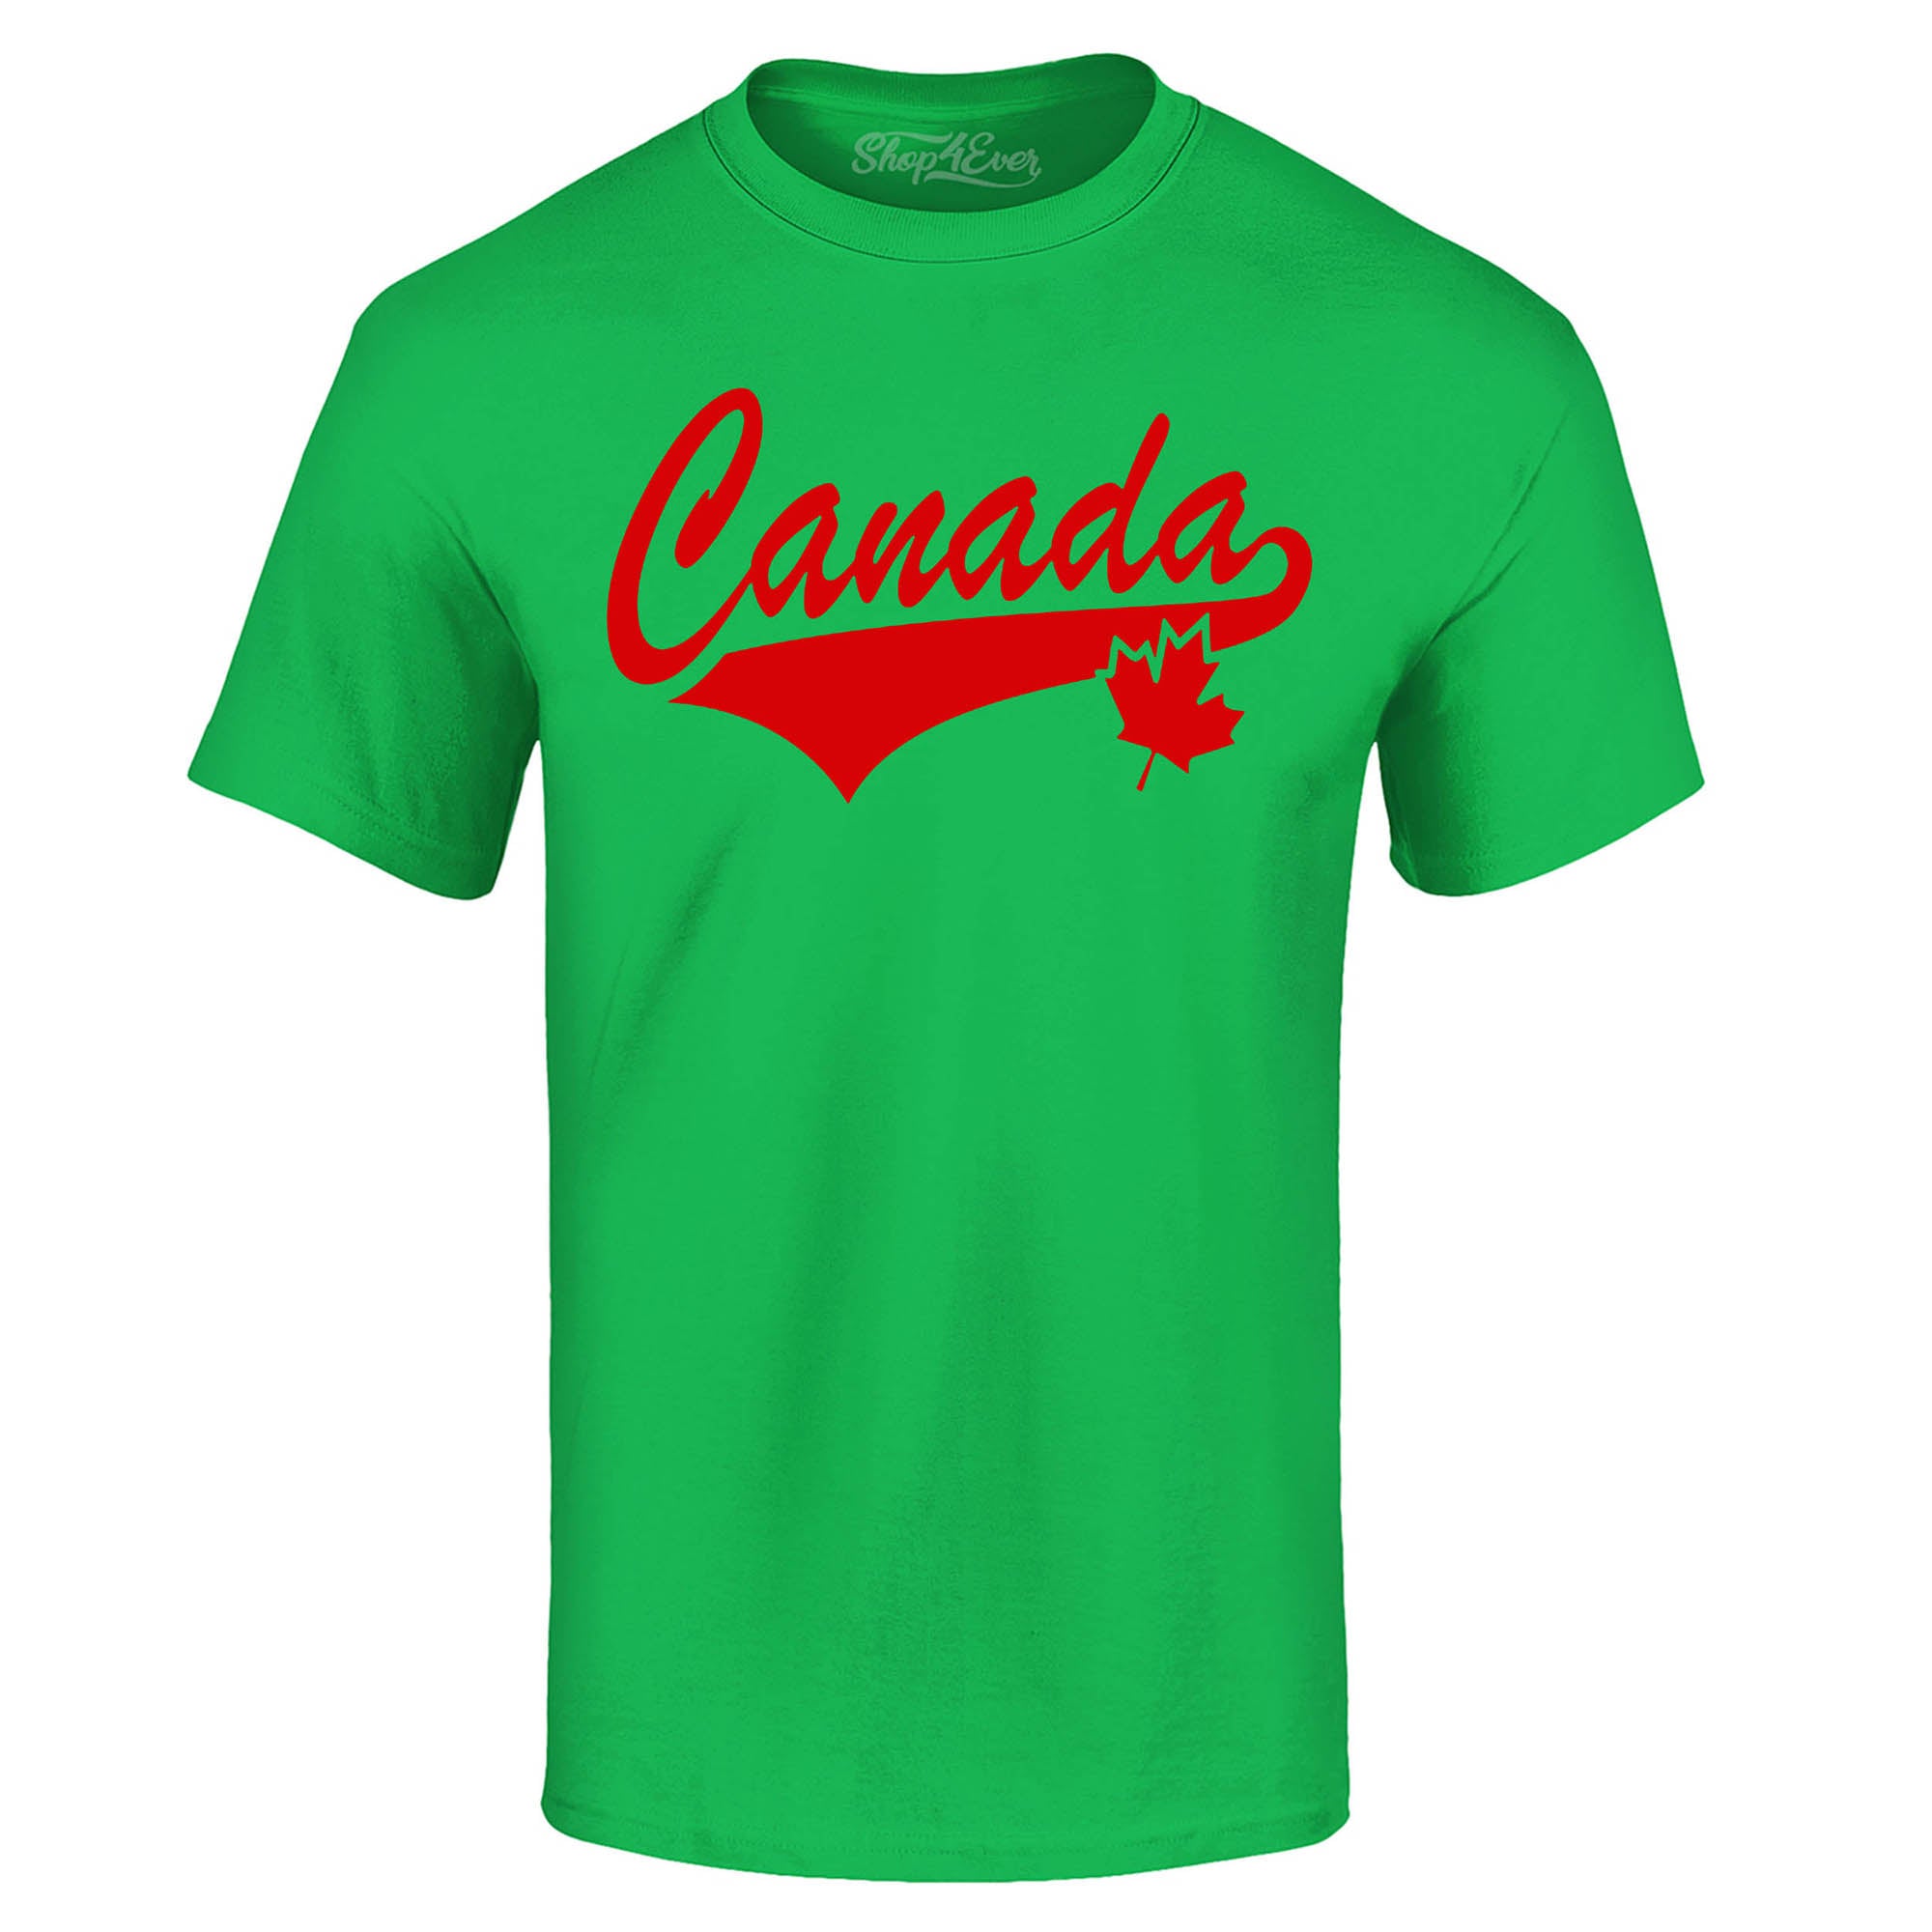 Canada Red T-Shirt